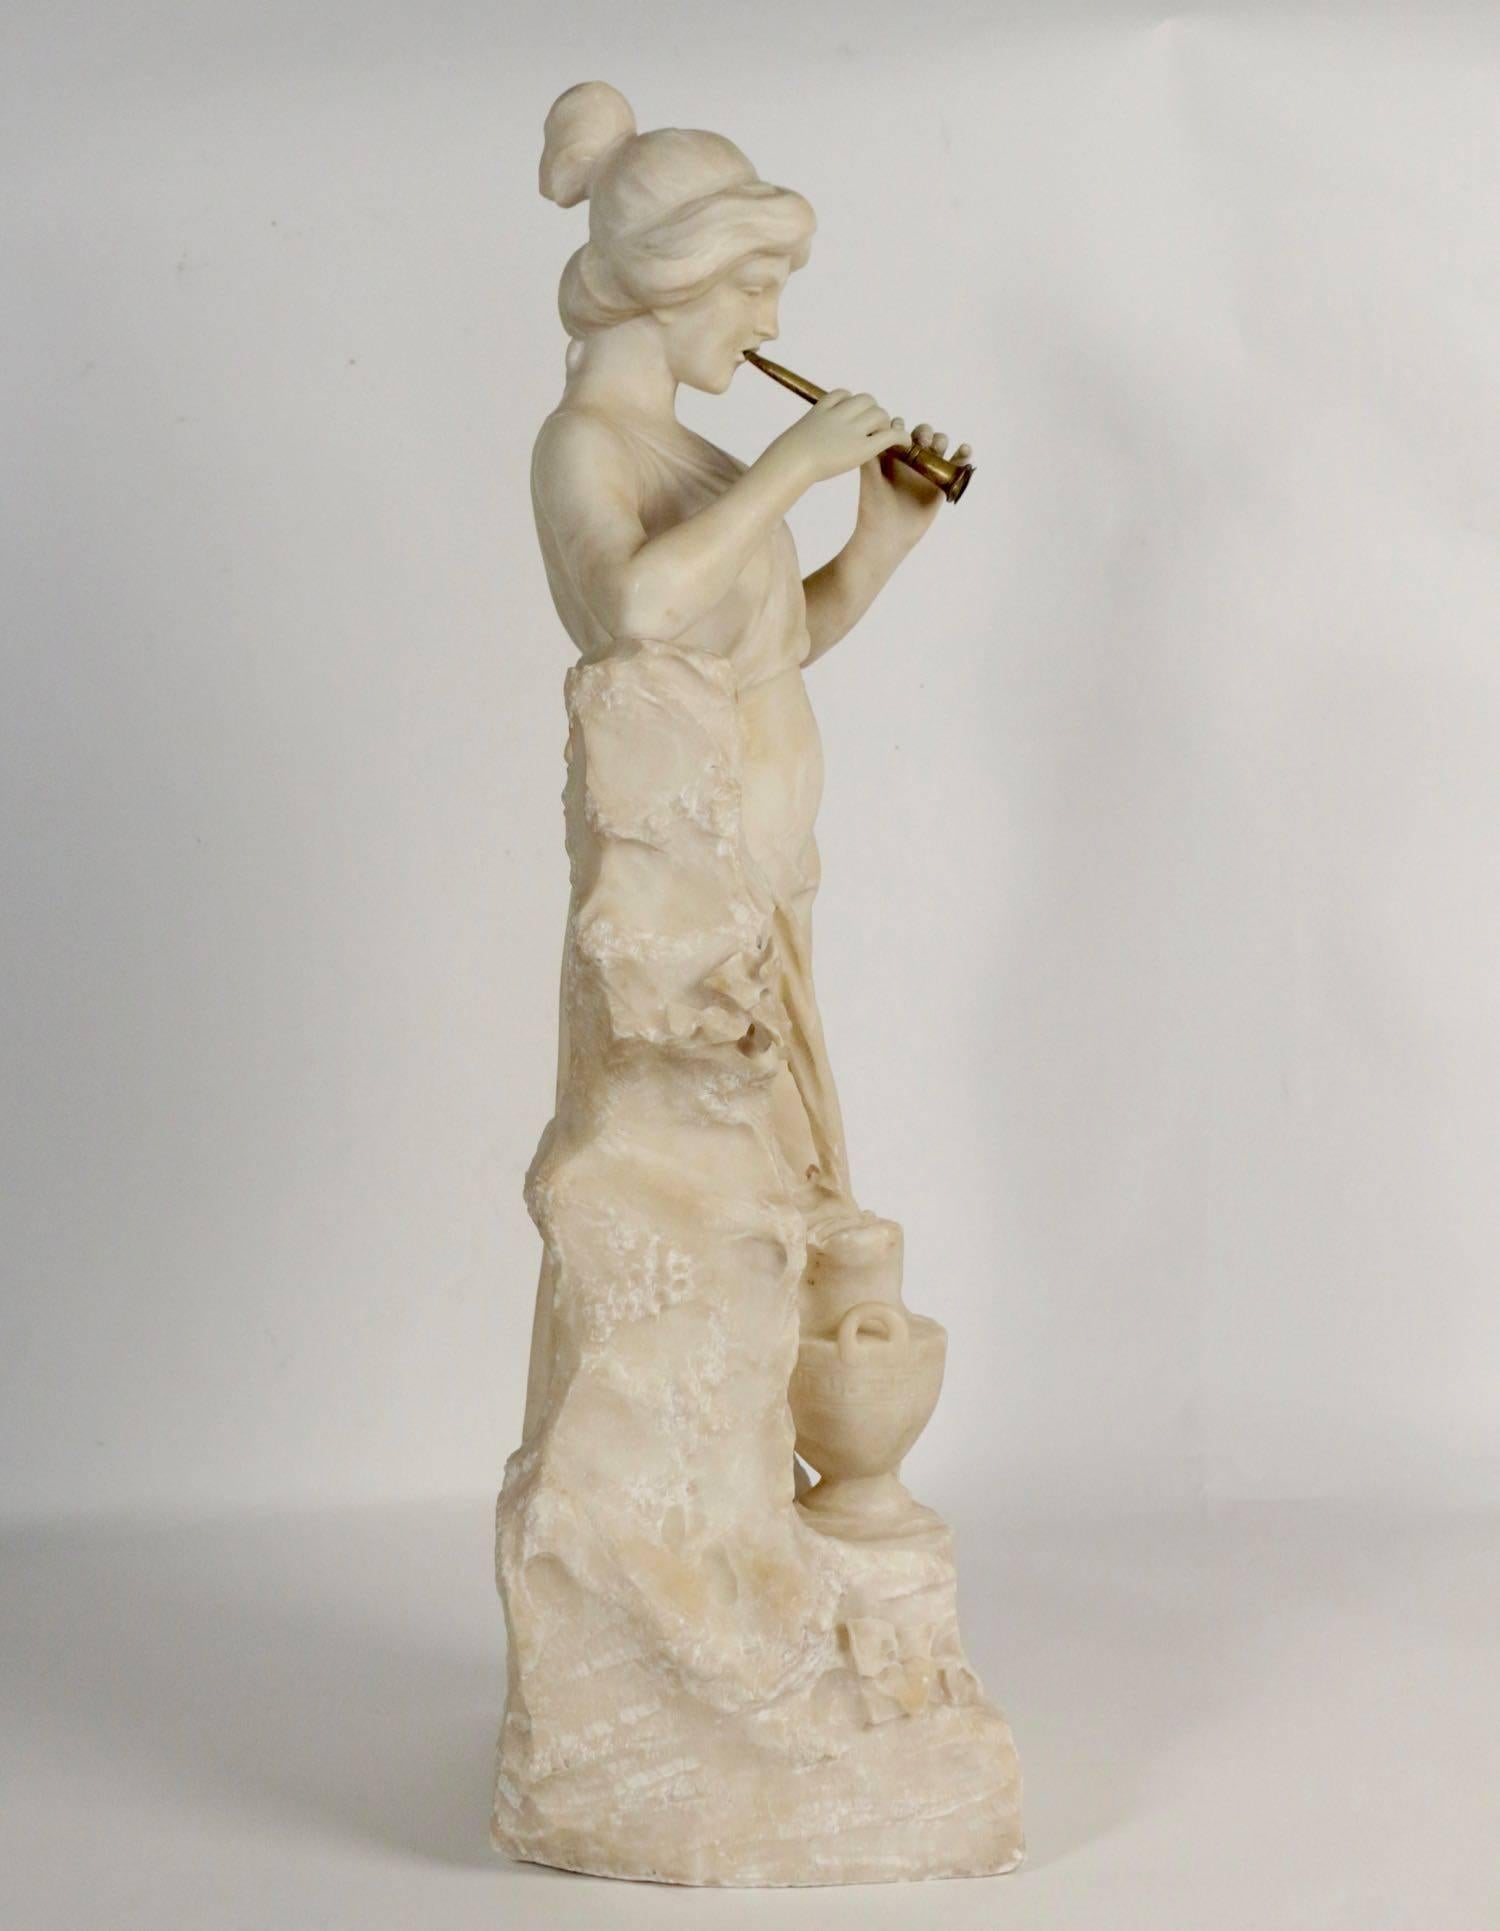 Alabaster, 19th century, woman with a flute beside the fountain, bronze flute. h: 78cm, l: Basic: 30cm x 23cm.